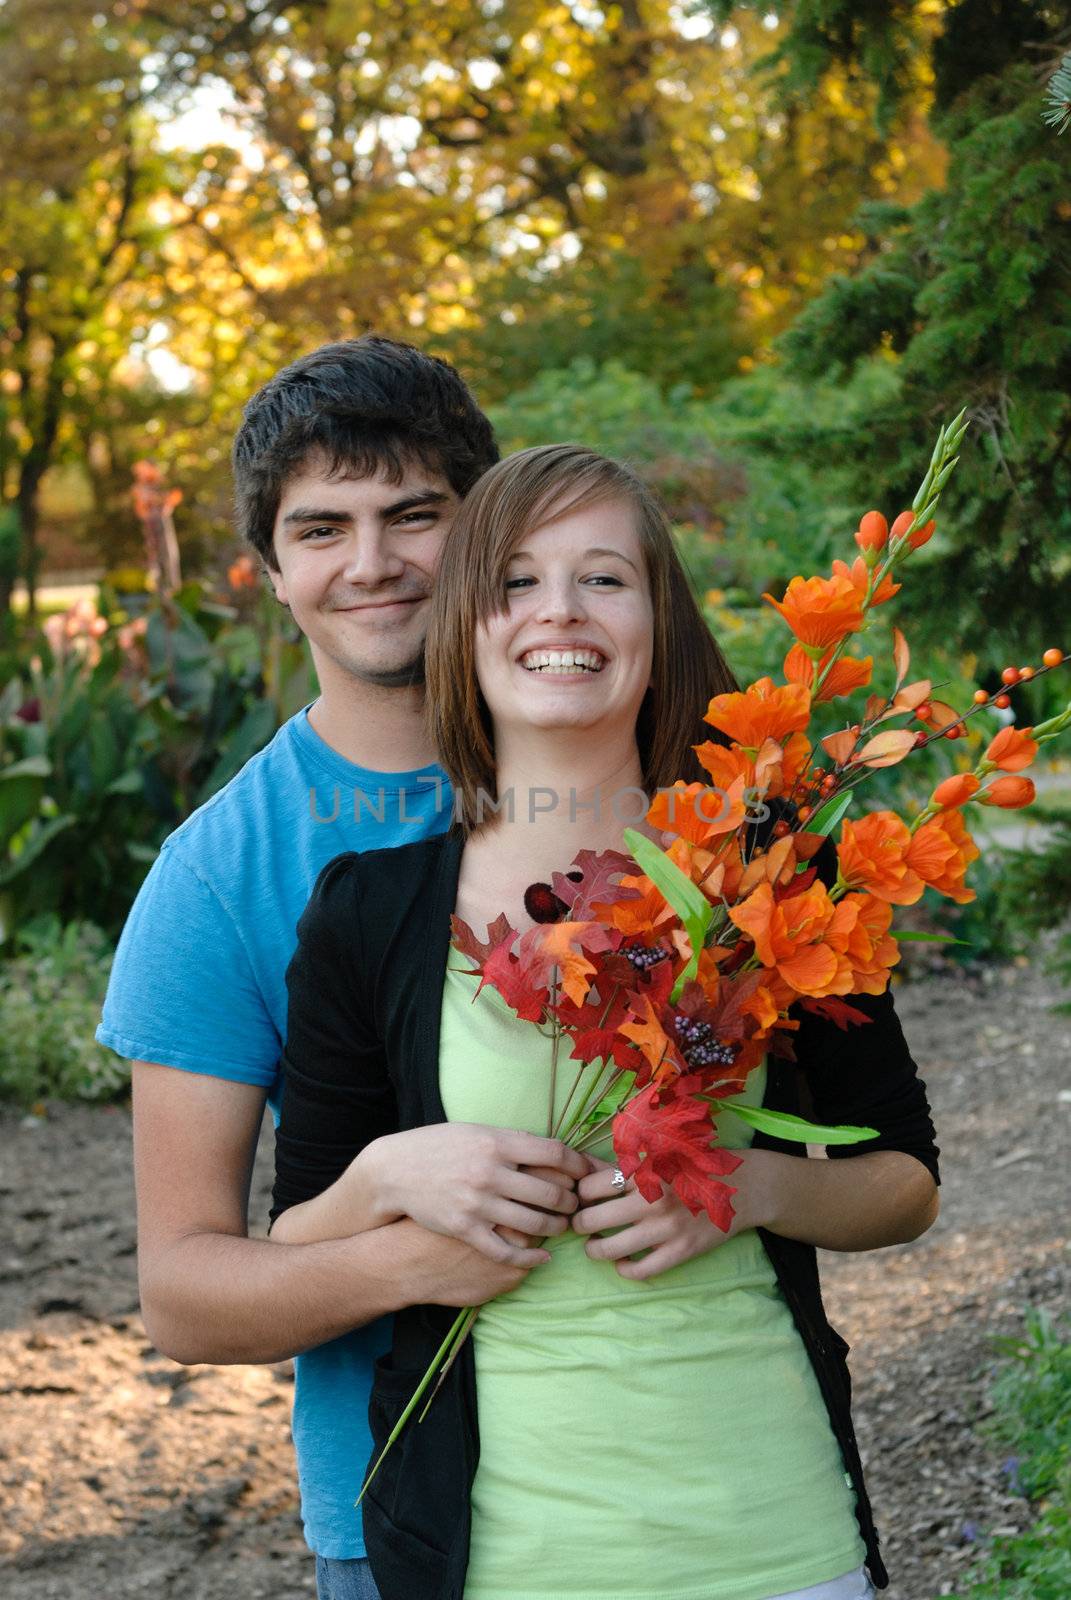 A young couple laughing and smiling during the fall